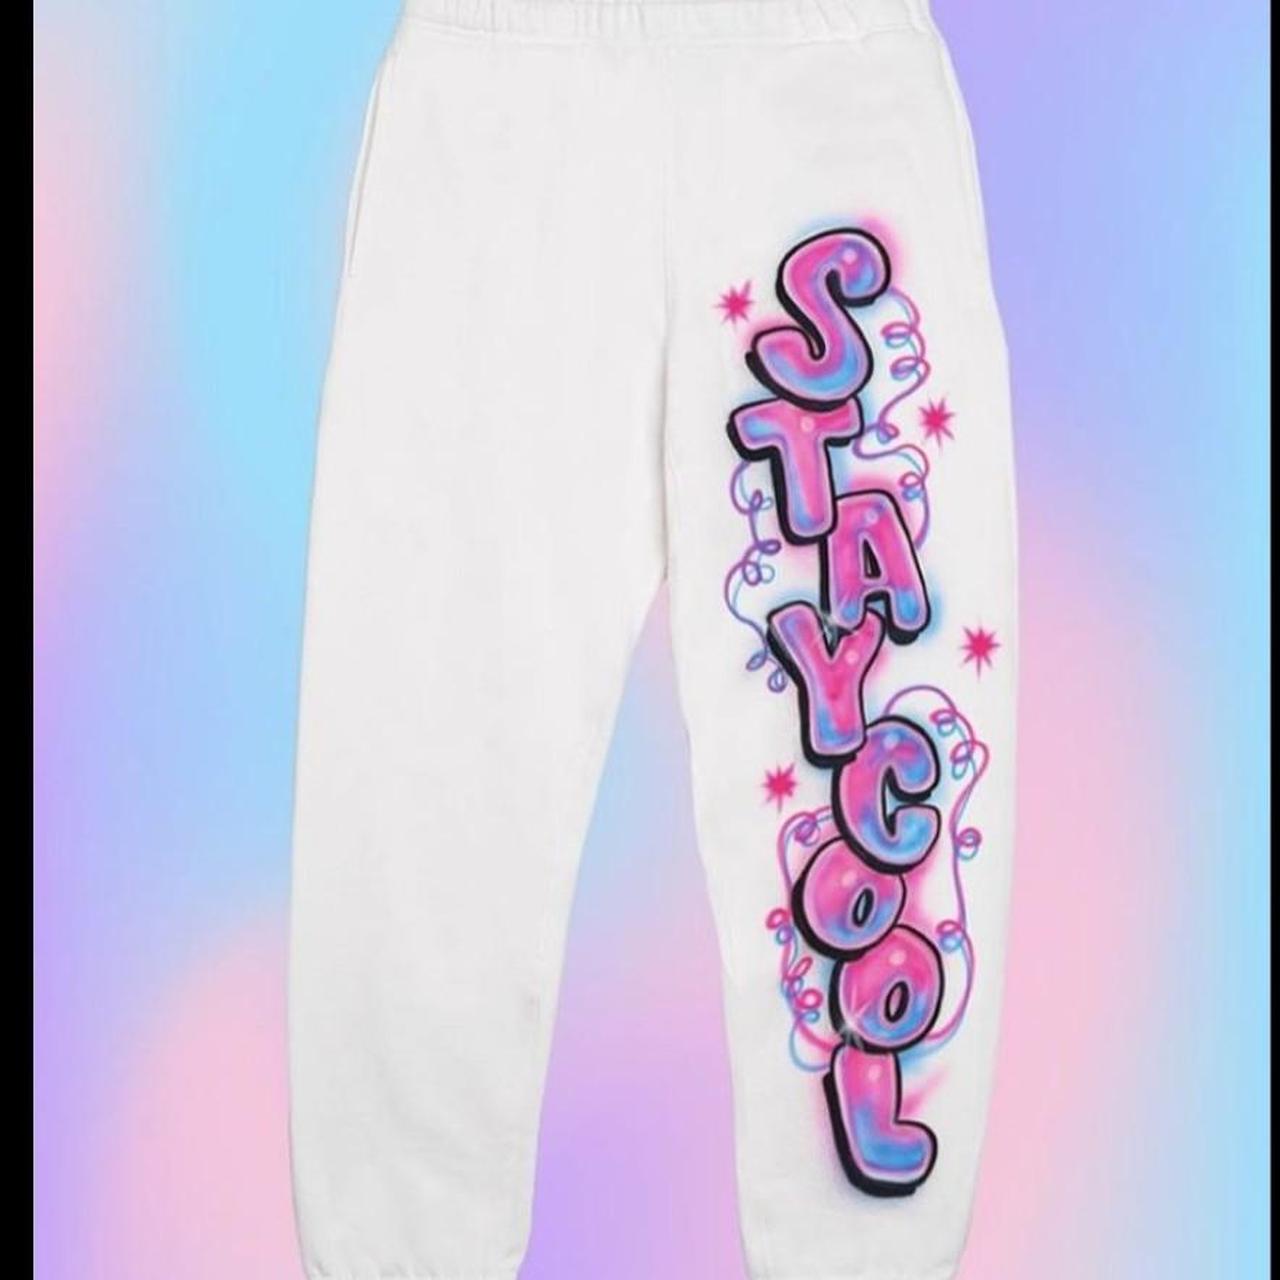 Product Image 1 - Stay Cool Airbrushed Birthday Sweatpants

Size: